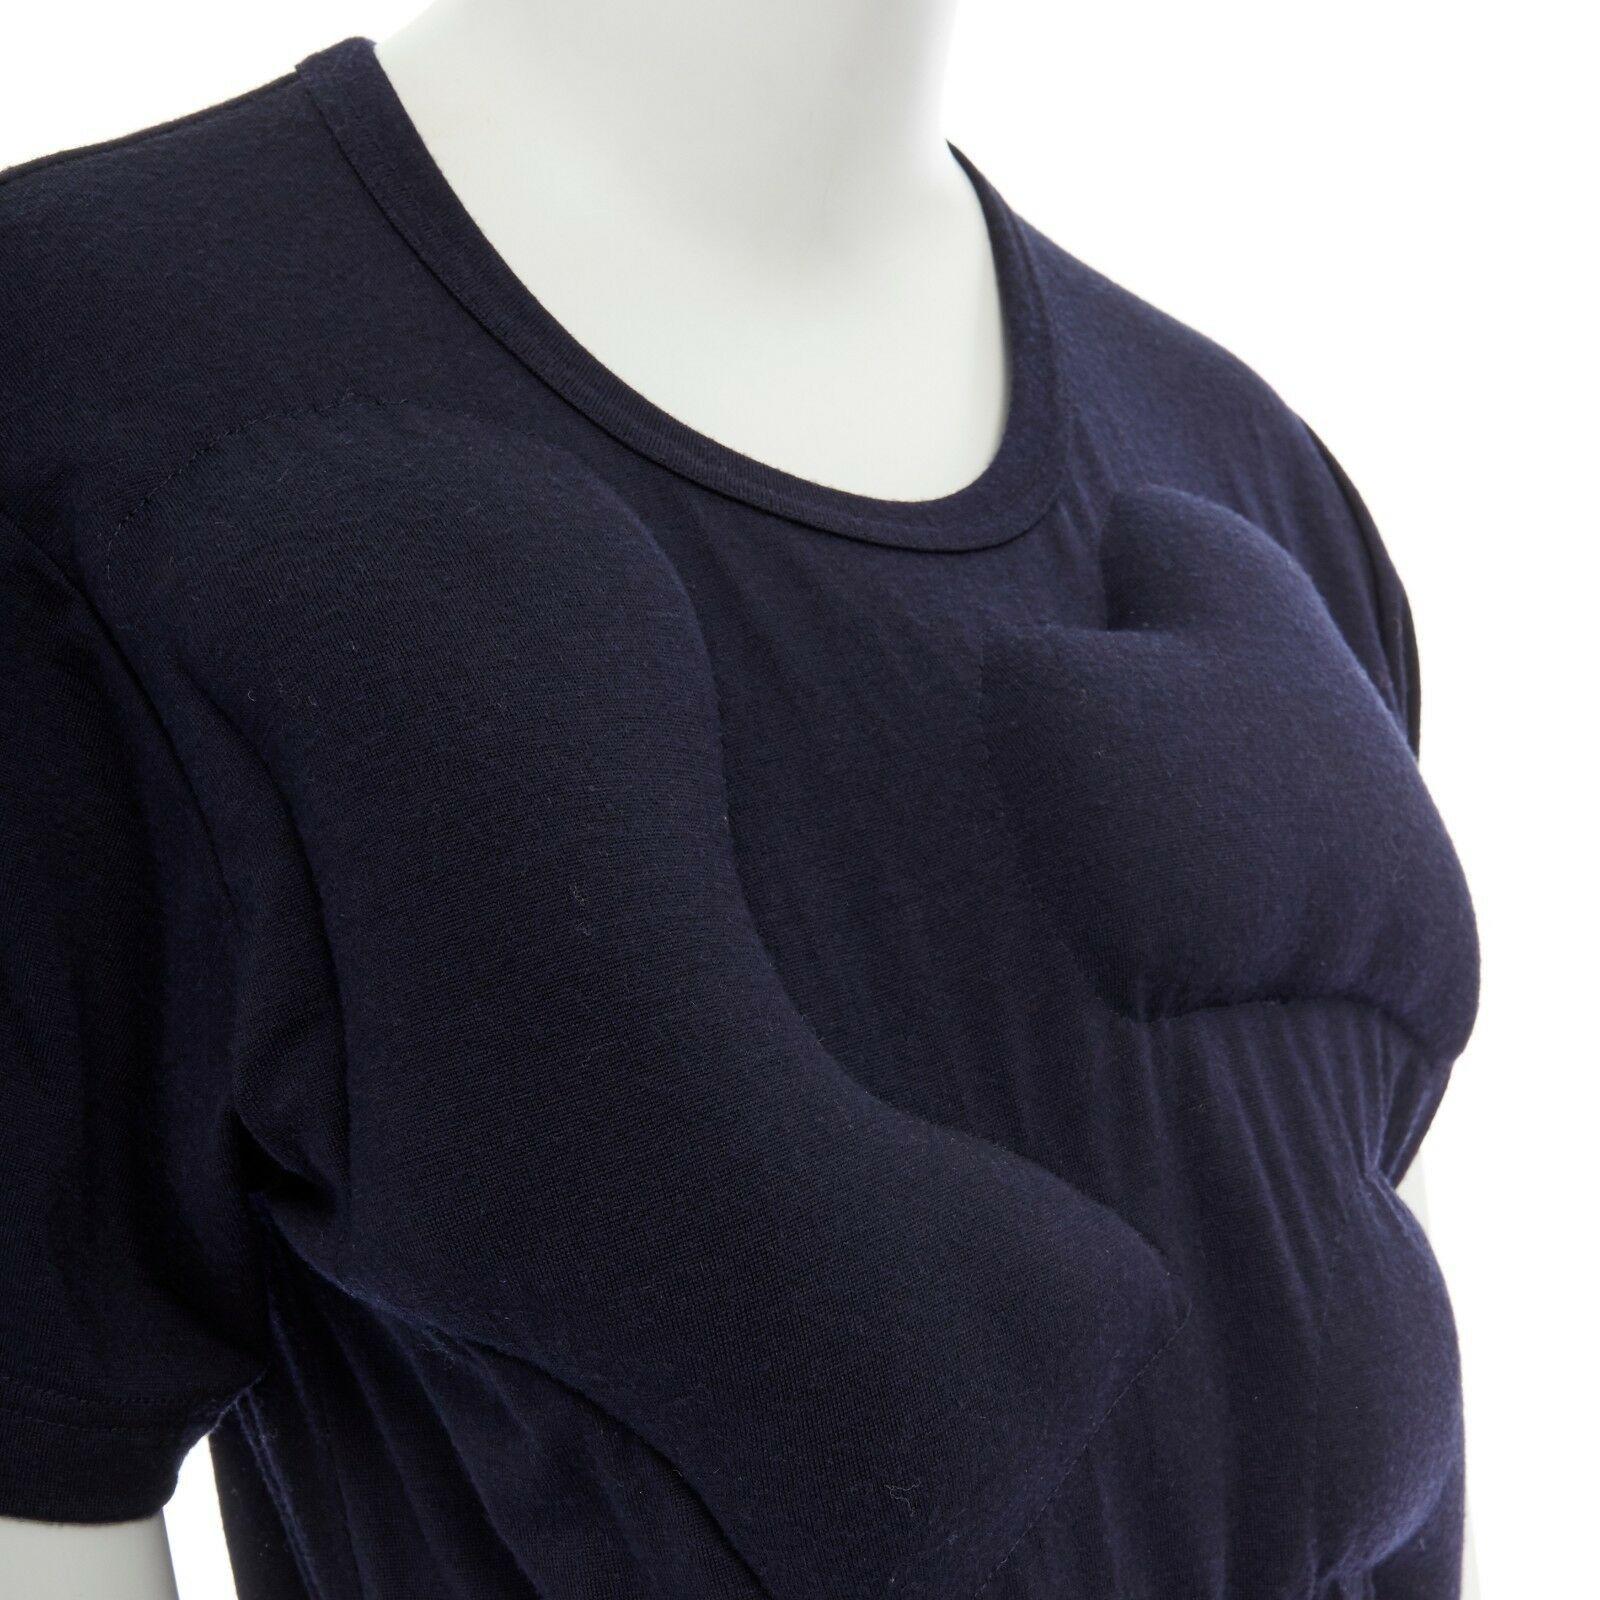 COMME DES GARCONS
FROM THE 2010 COLLECTION
100% WOOL. NAVY BLUE. SHORT SLEEVE. RIBBED SCOOPED NECK. 
4 IRREGULAR CUSHION 3D PADDING AT FRONT. 
MADE IN JAPAN

CONDITION
Very good, this item was pre-owned and is in very good